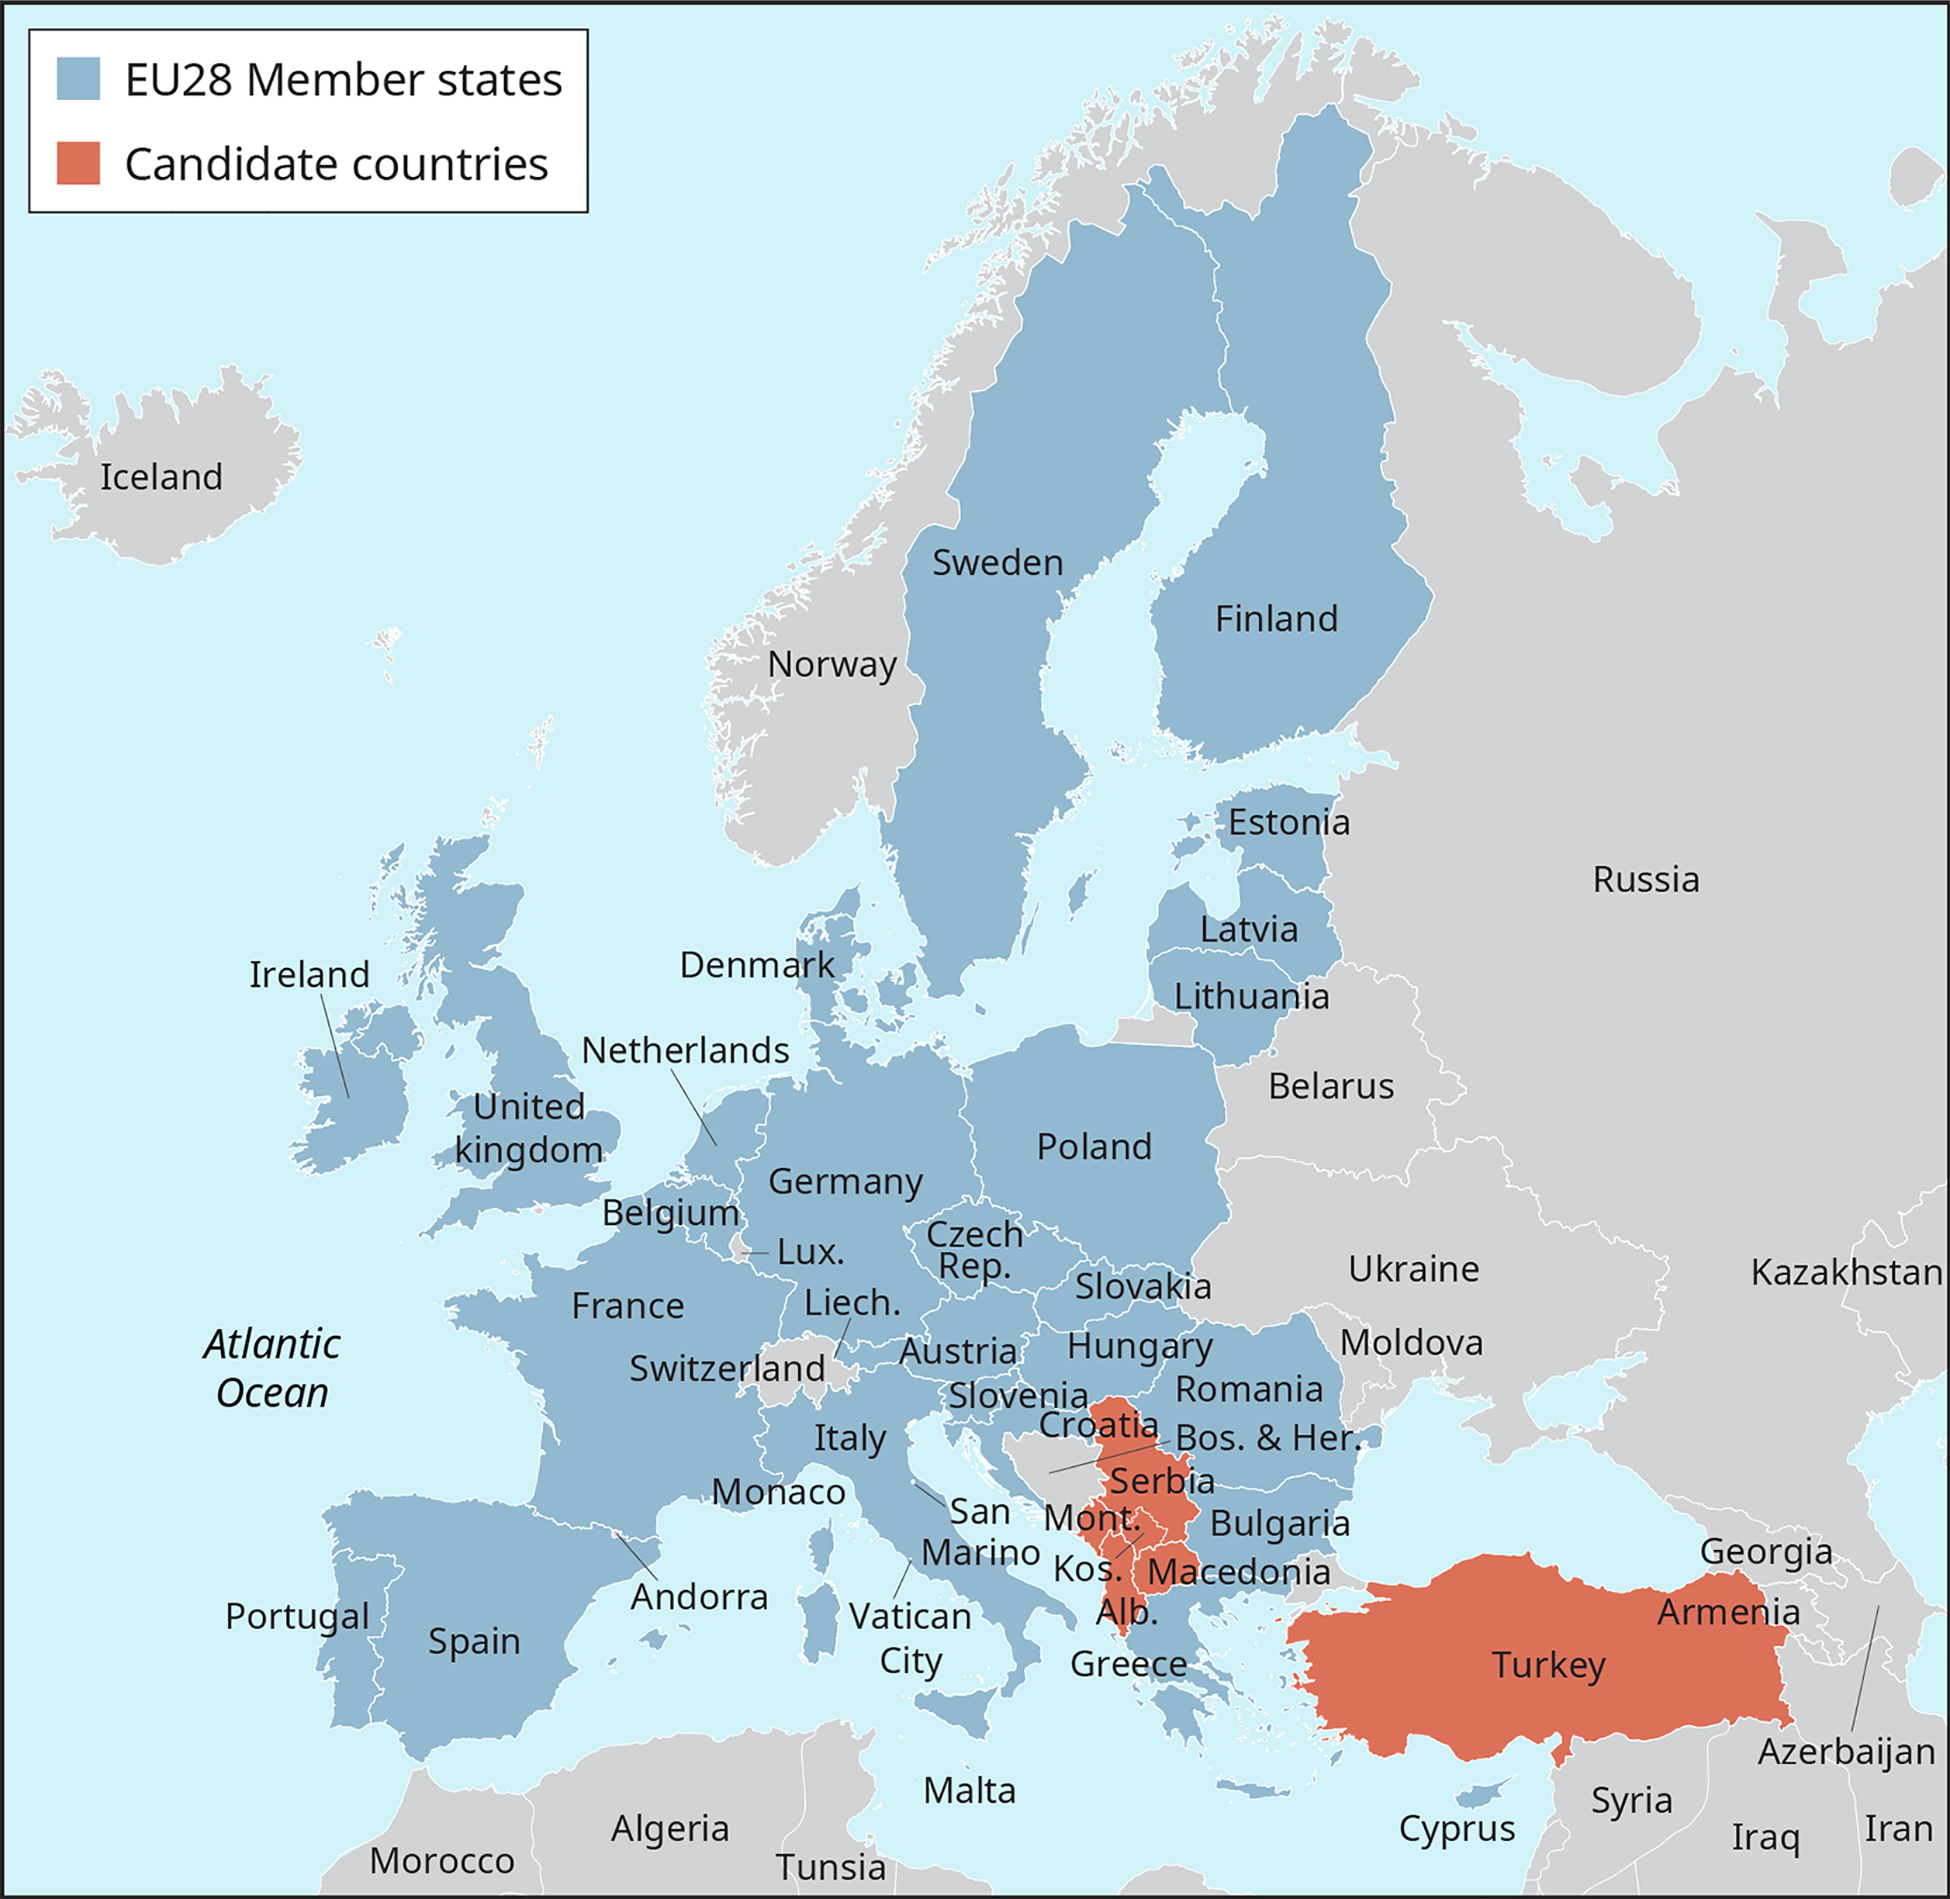 A map of Europe is color coded to show the E U 28 Member States, and those that are candidate countries.